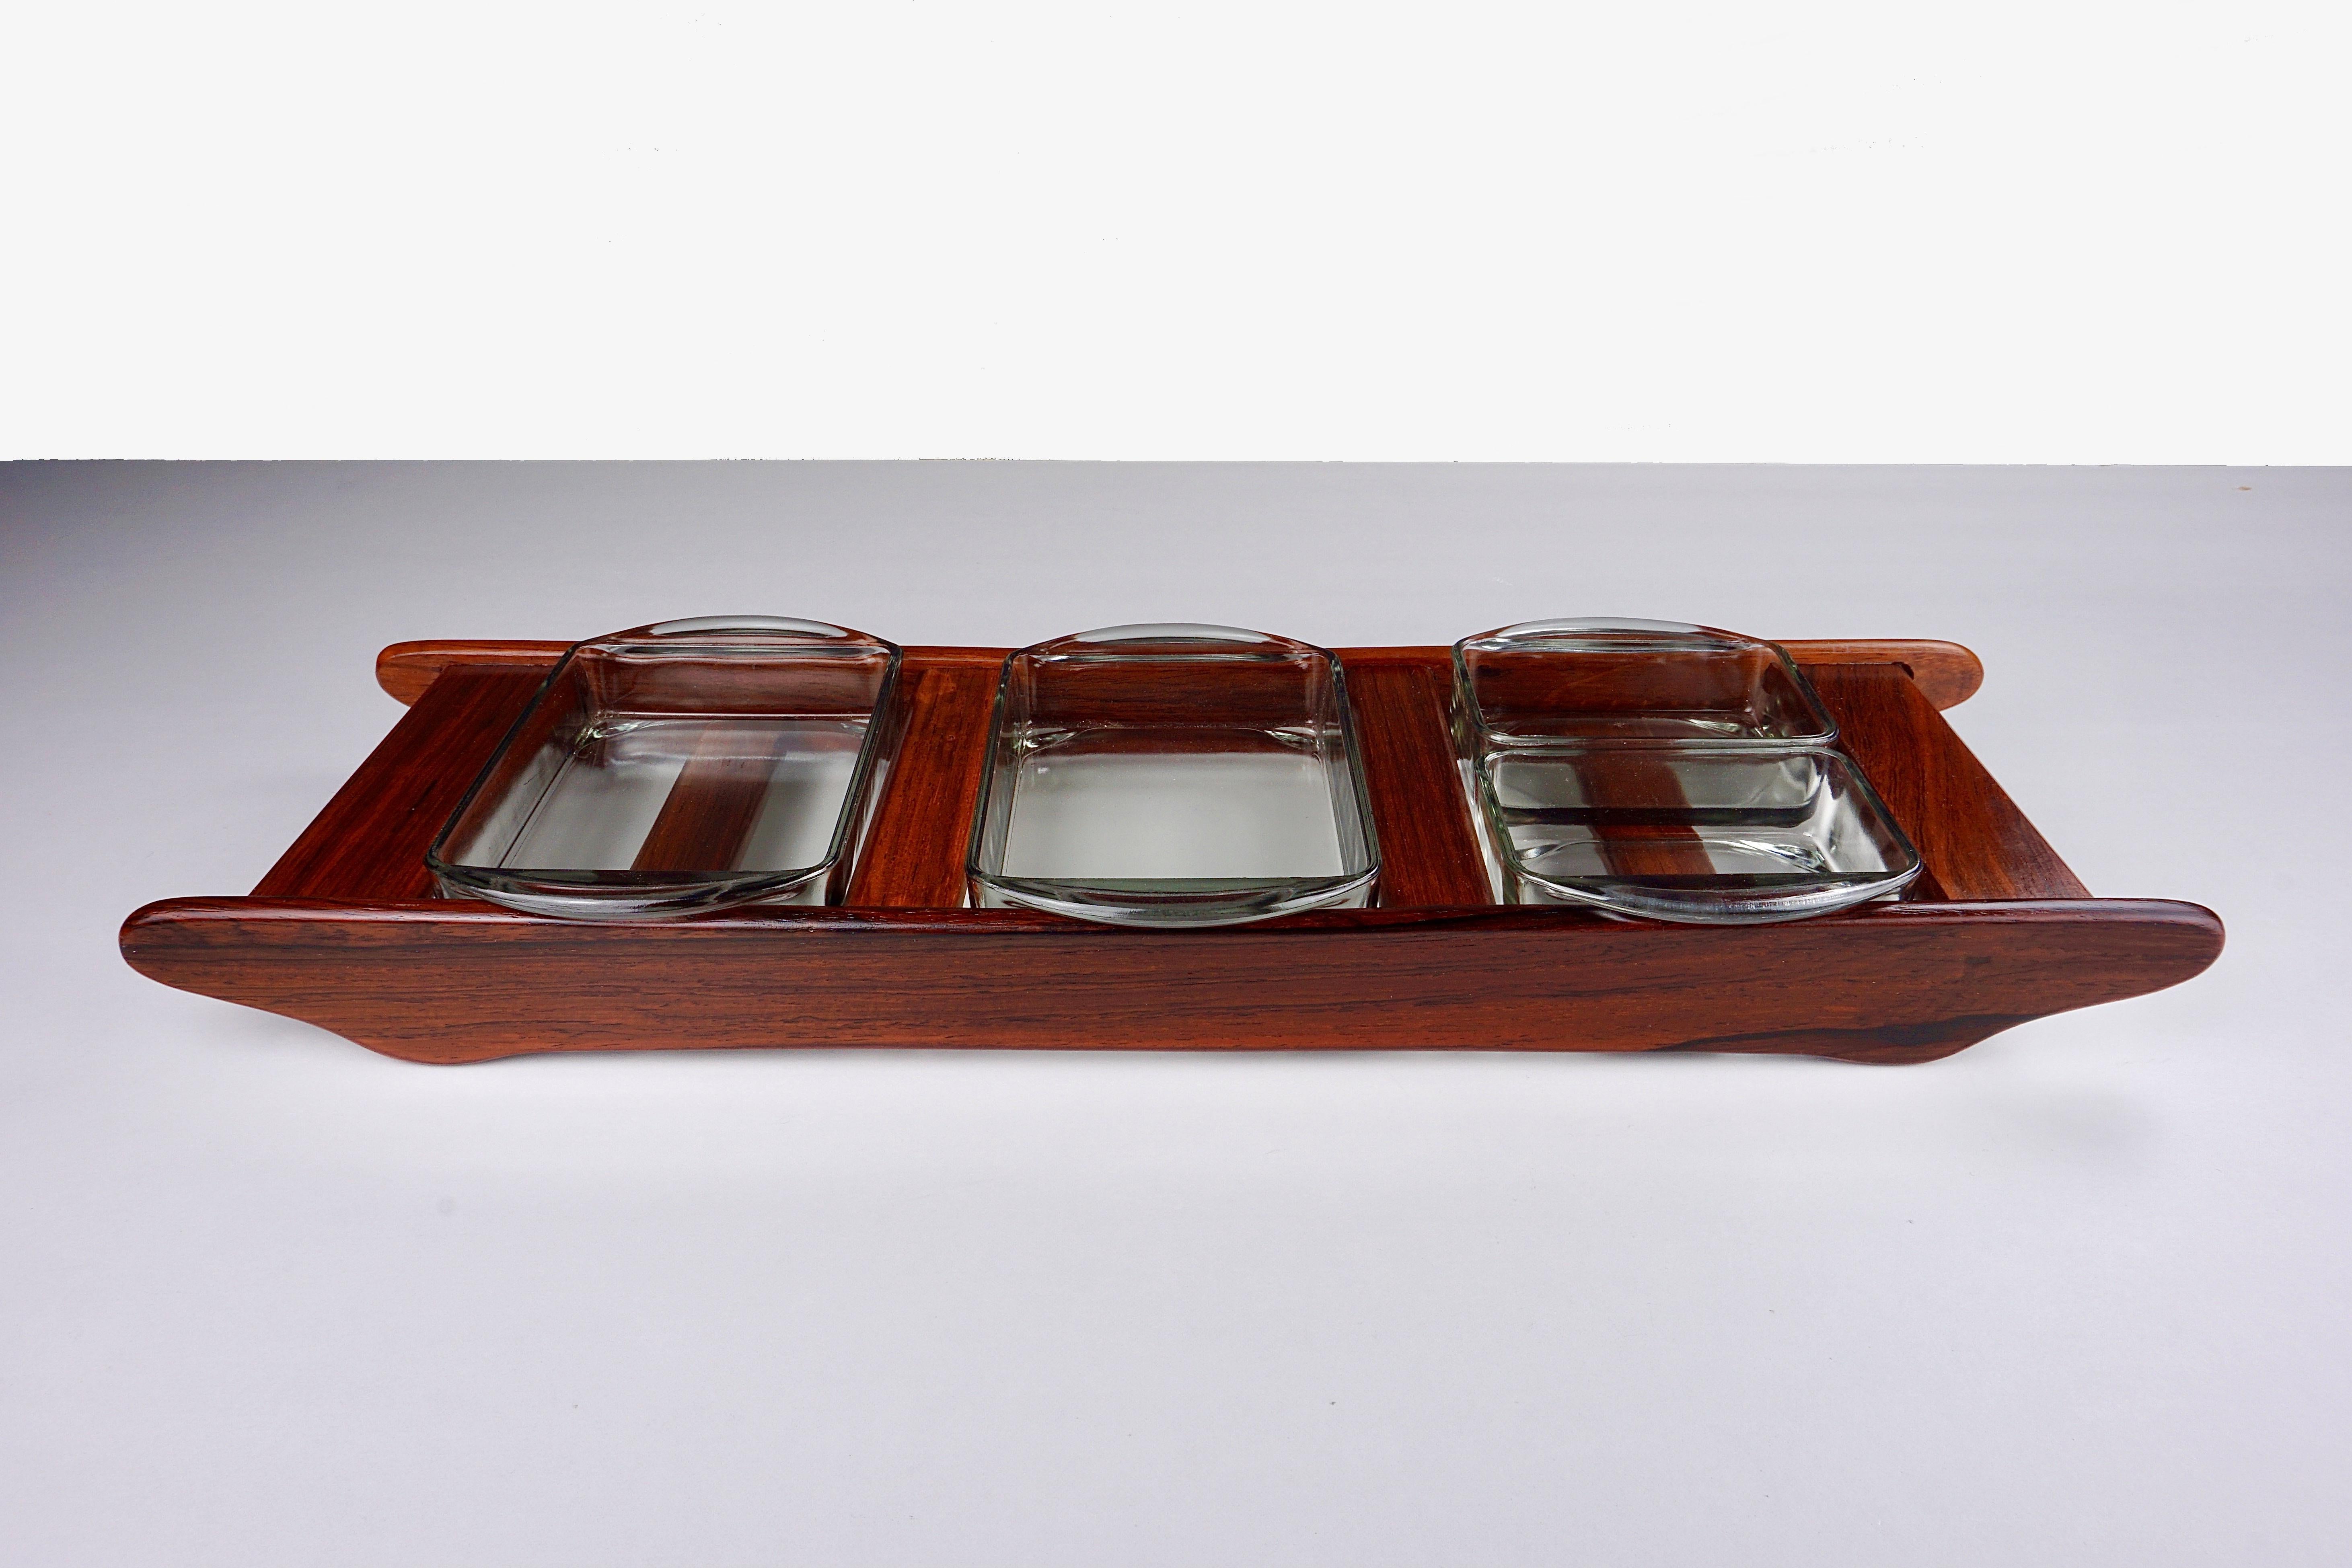 Danish 1960´s rosewood serving tray with small dishes for culinary accessories.

The elegant tray consisting of a rosewood tray and 4 containers for culinary accessories is in very good condition with almost no signs of age and use.

The serving